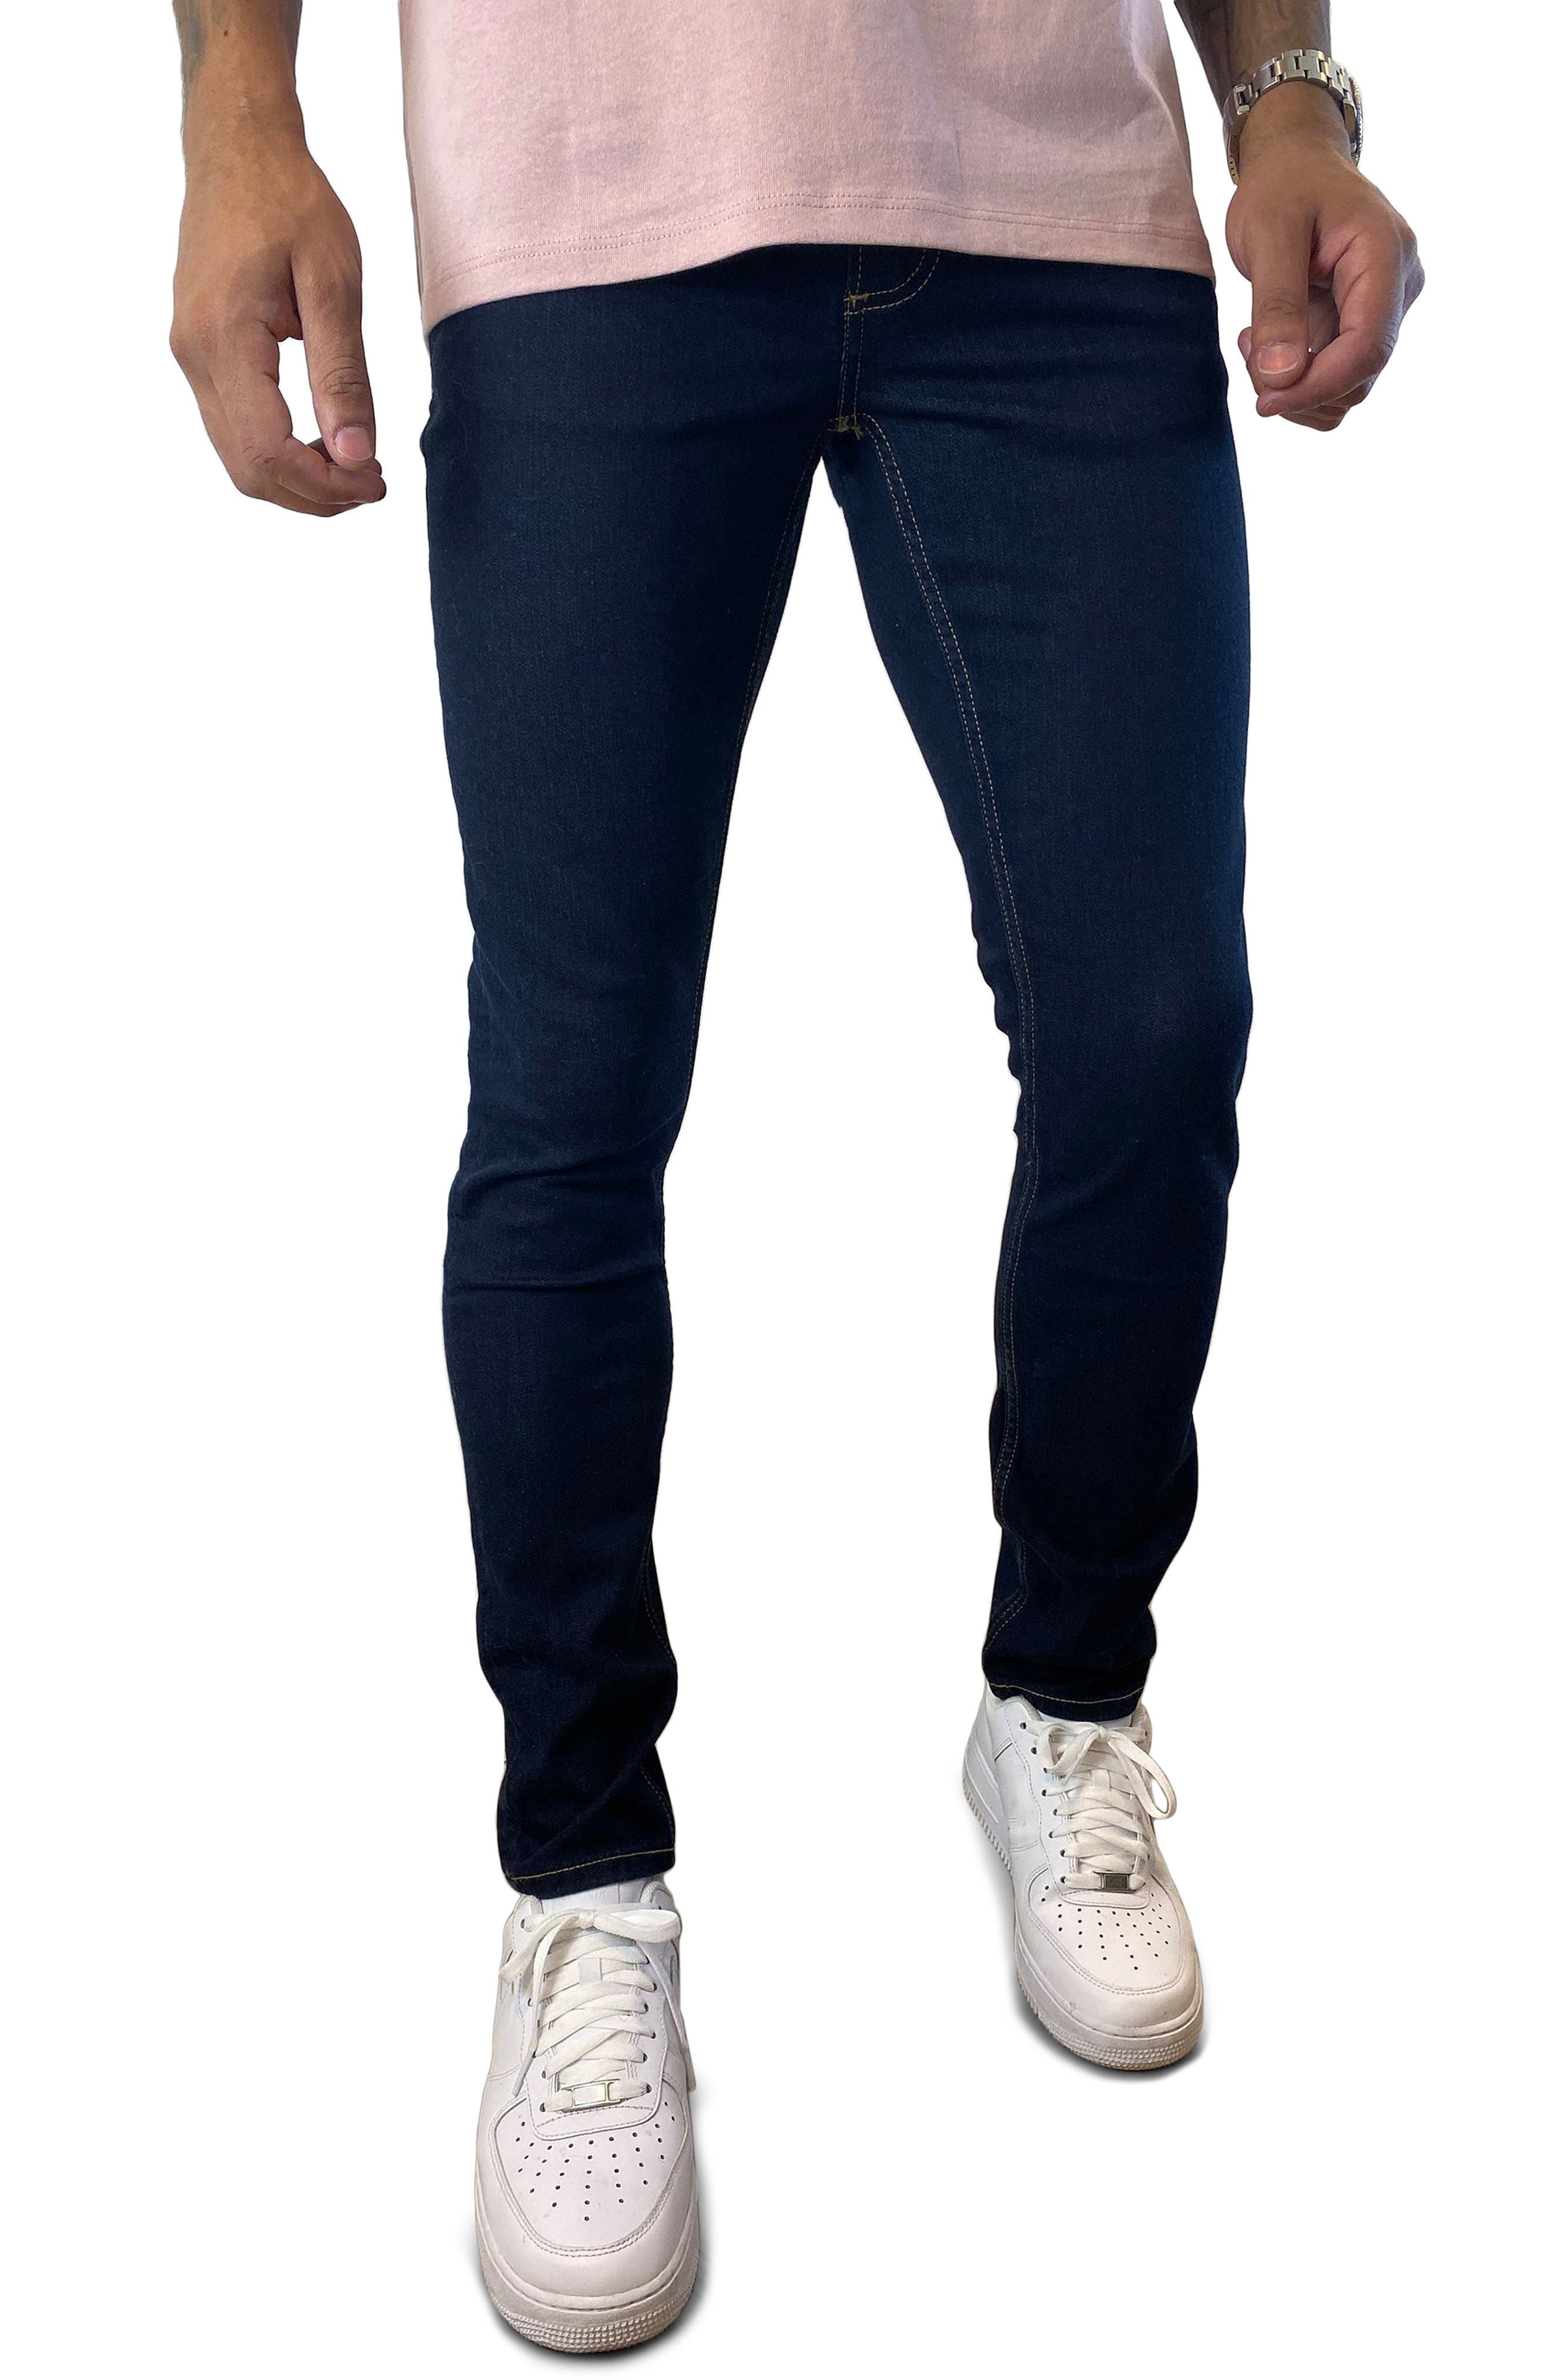 skin fit jeans for mens